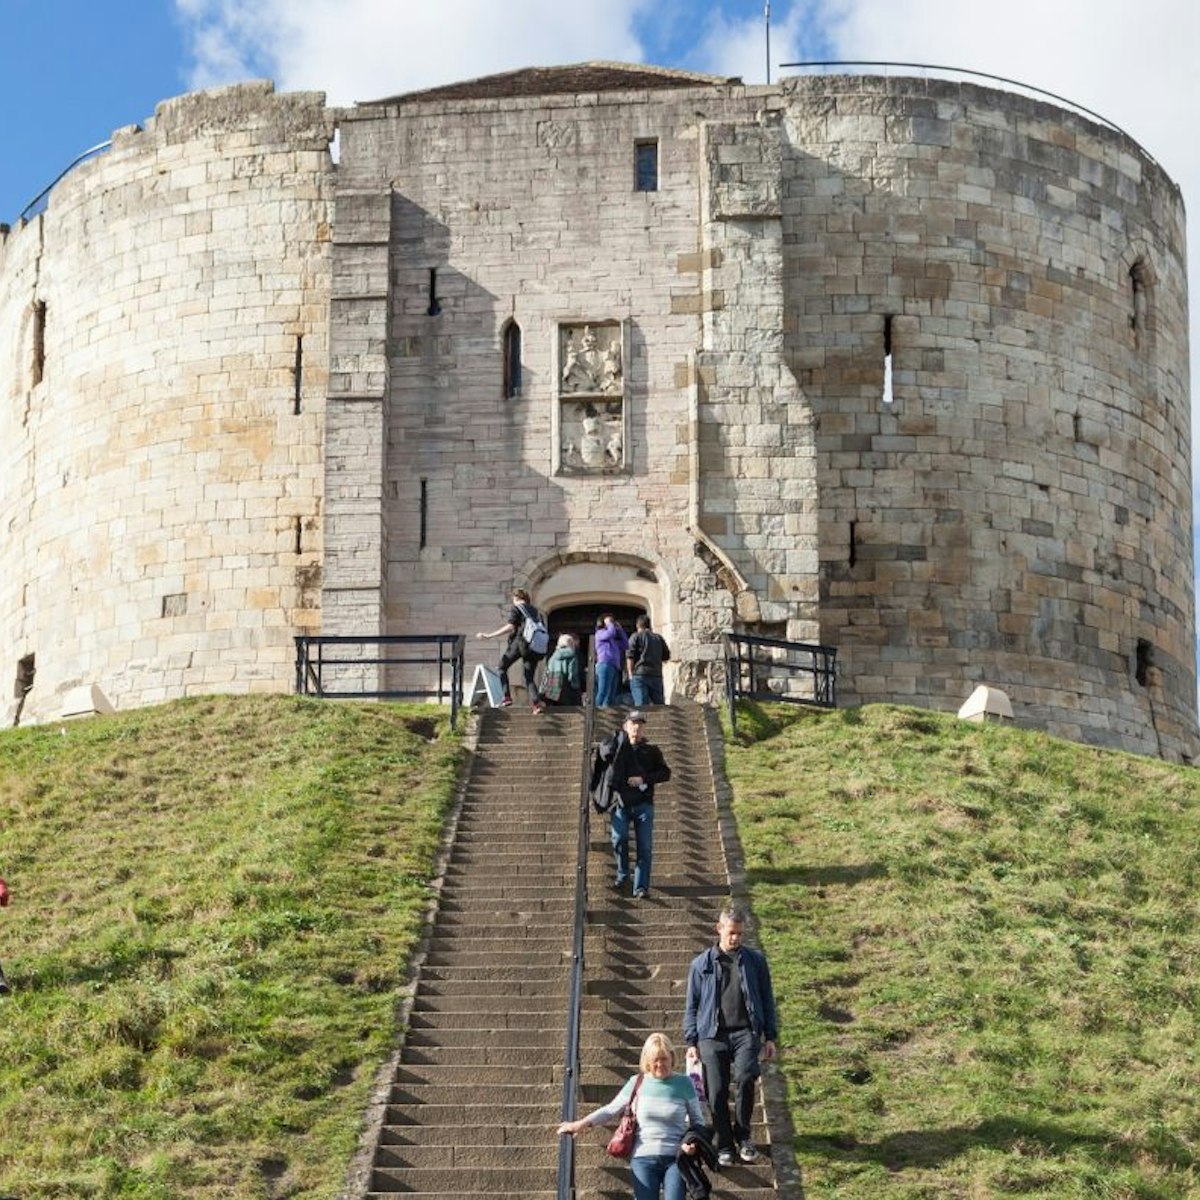 York, United Kingdom - October 2, 2016: View of Clifford's Tower, a Norman Motte and Bailey castle in York, England, with visitors climbing the steps to see the attraction.